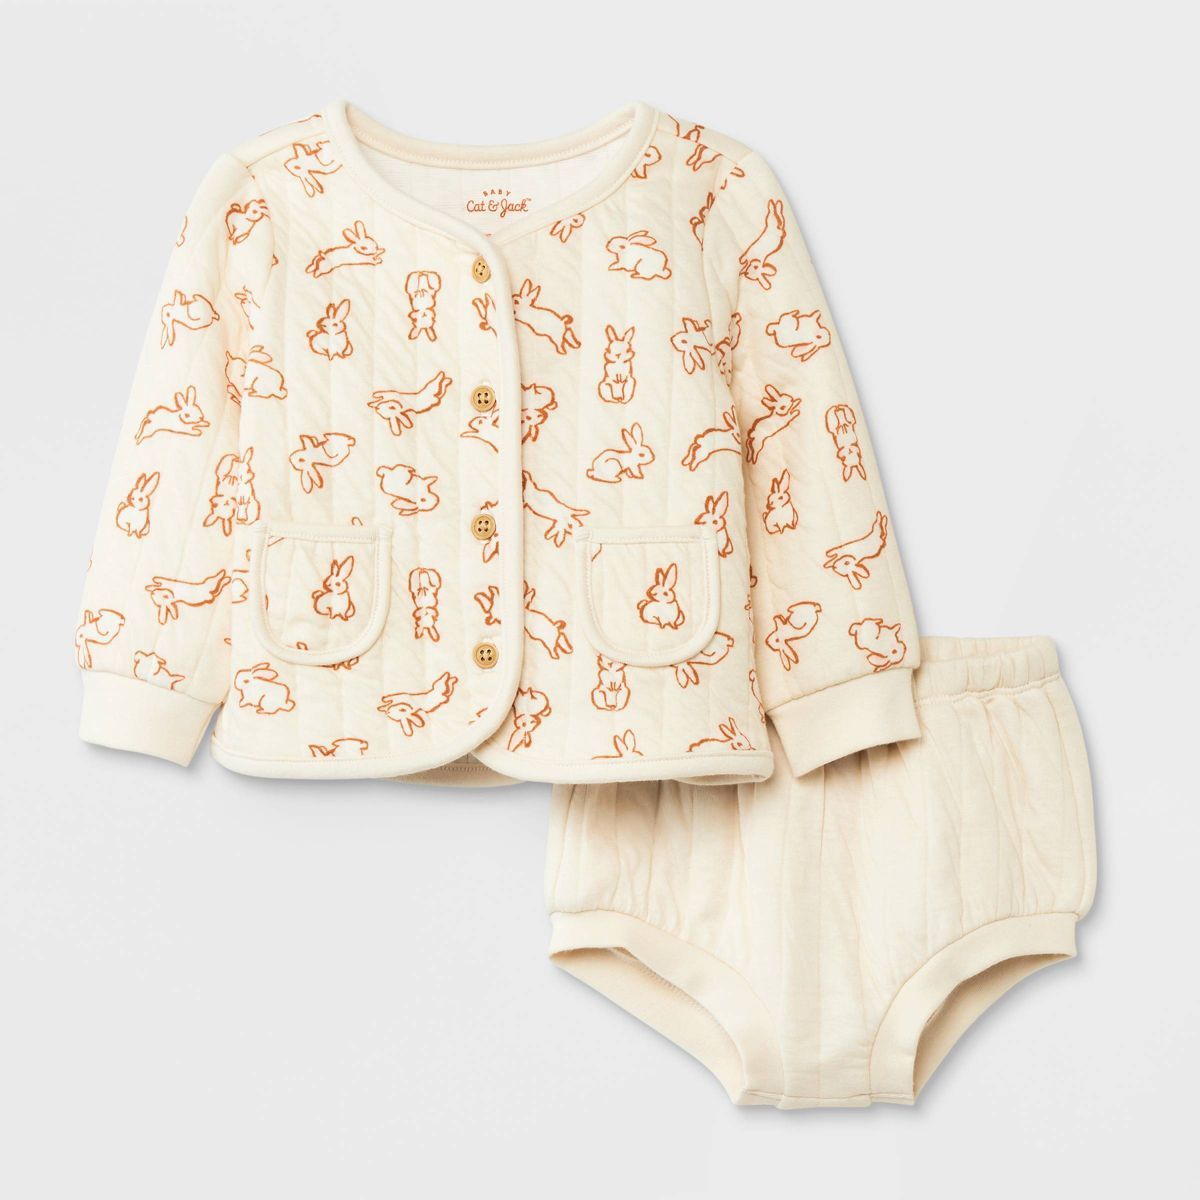 Baby Quilted Layering Top & Bottom Set - Cat & Jack™ Off-White 18M | Target